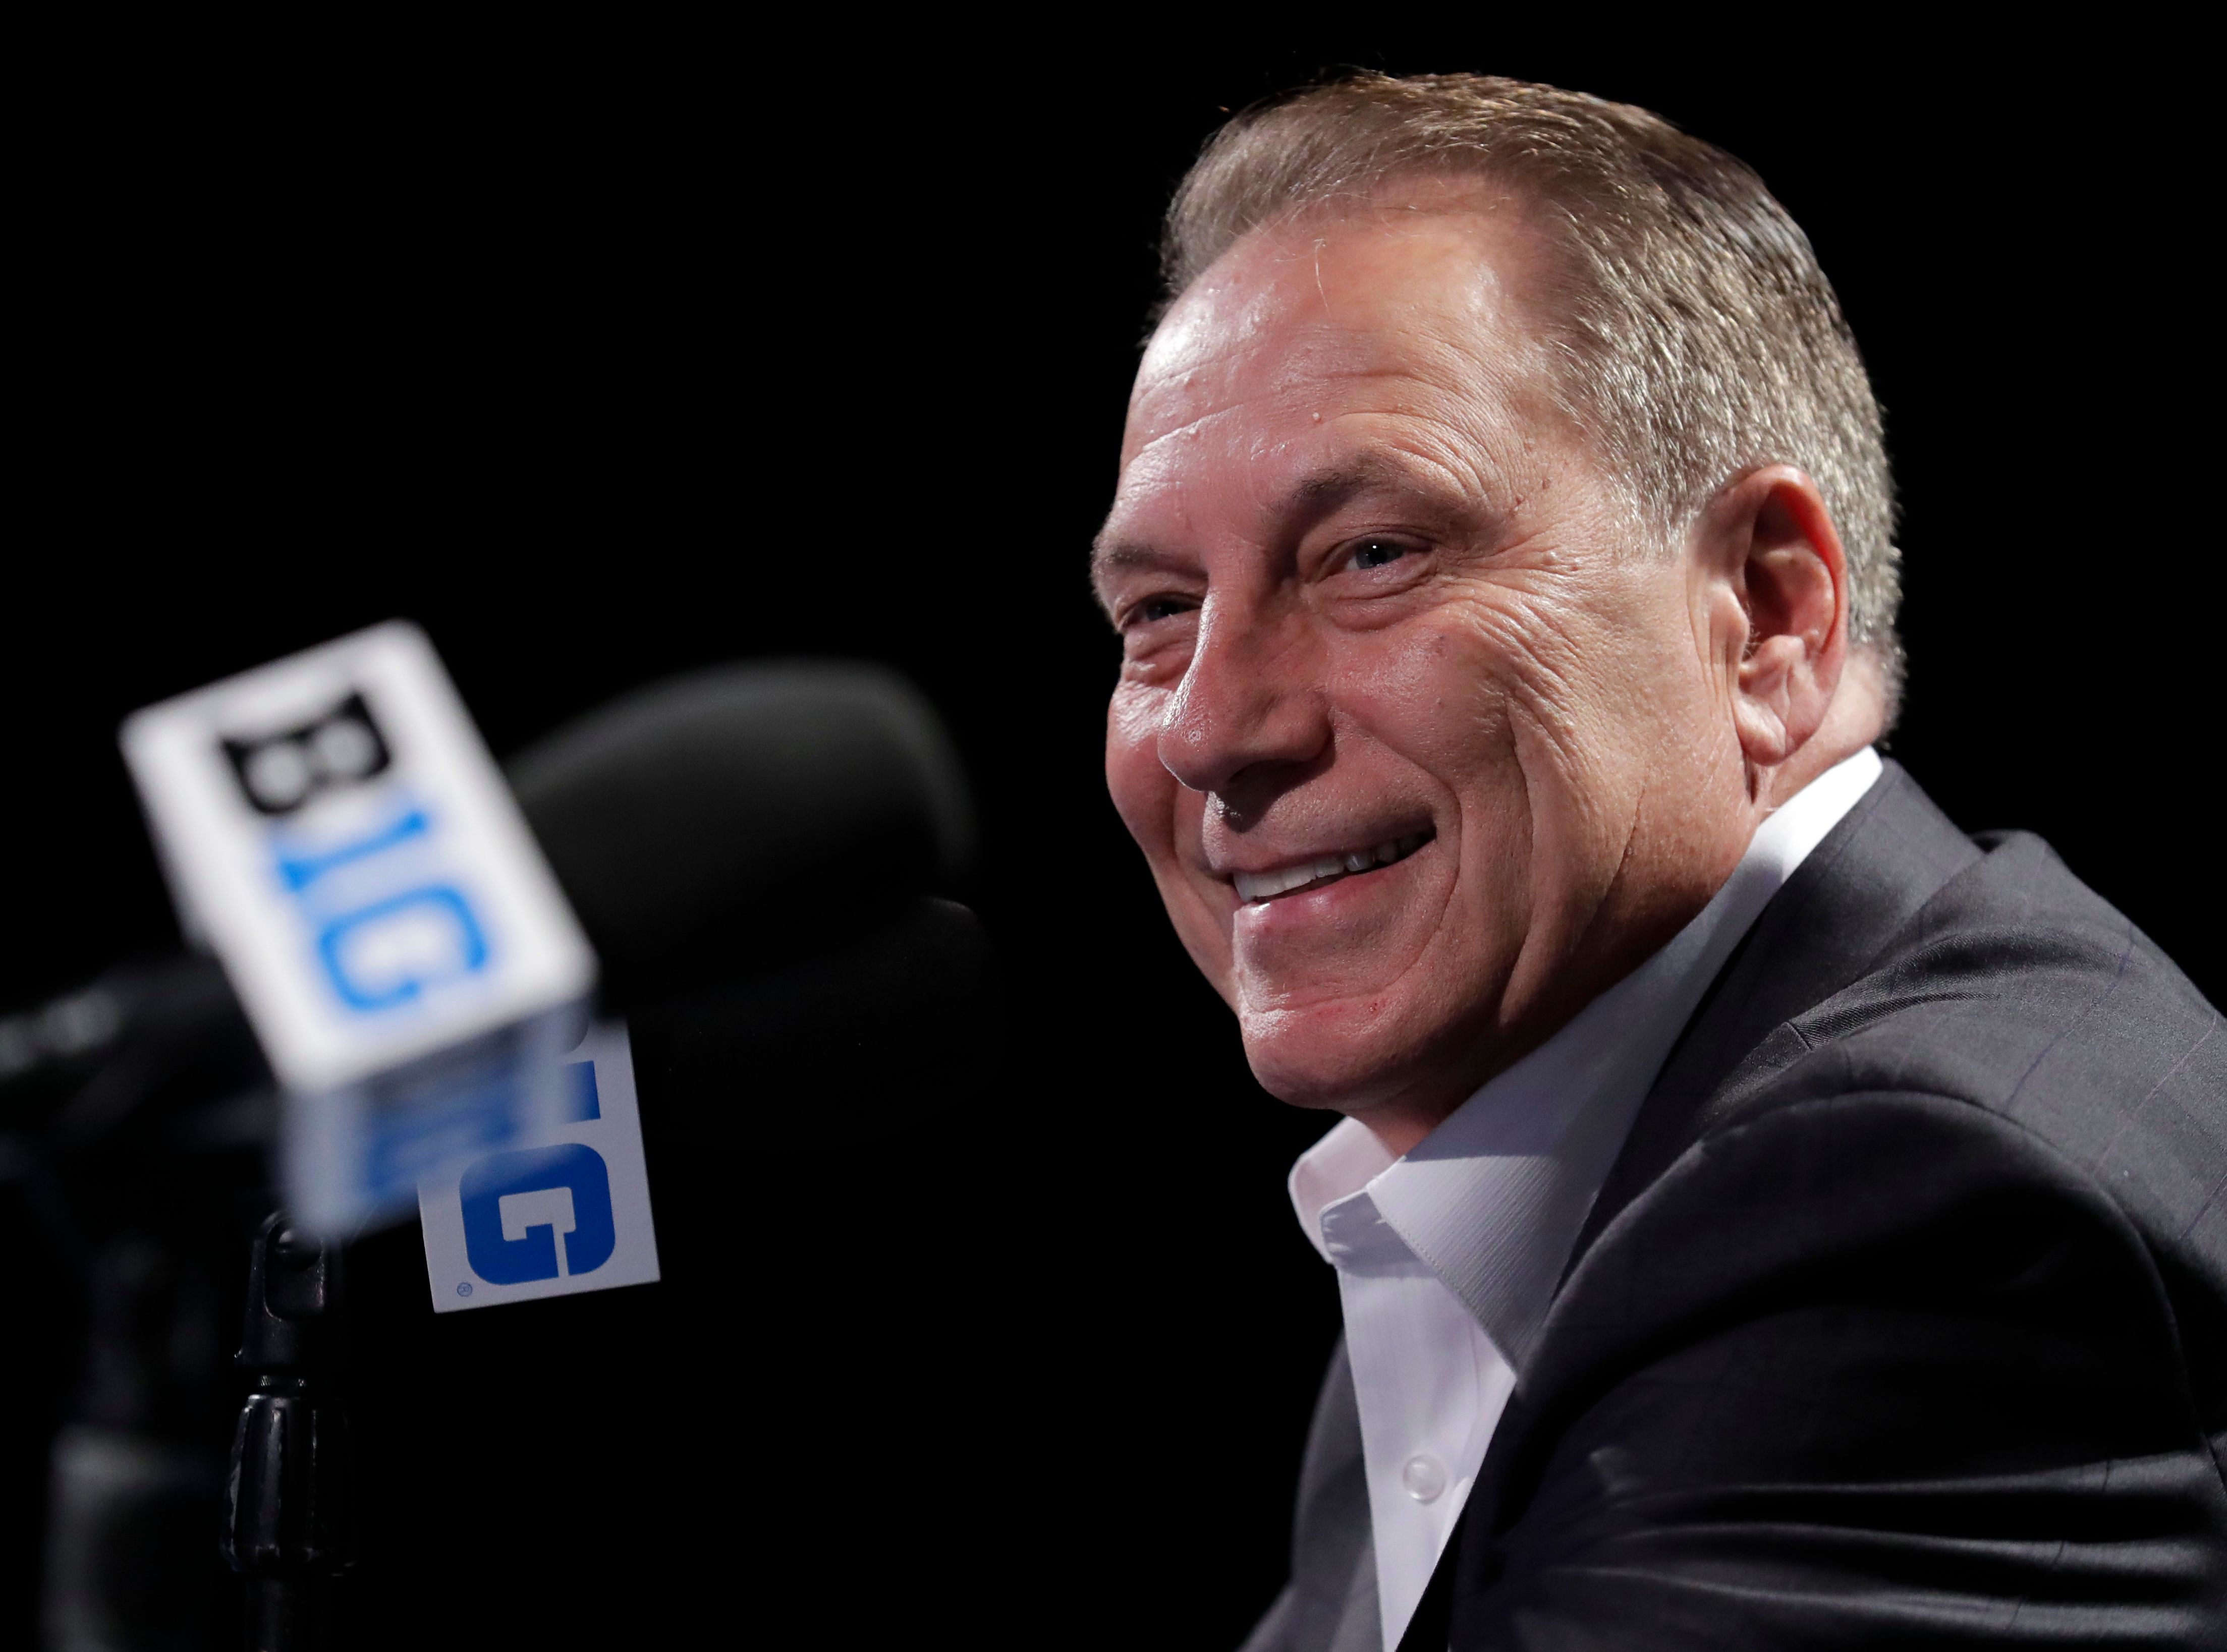 Tom Izzo breaks silence on sexual assault coverup allegations ‘Don’t